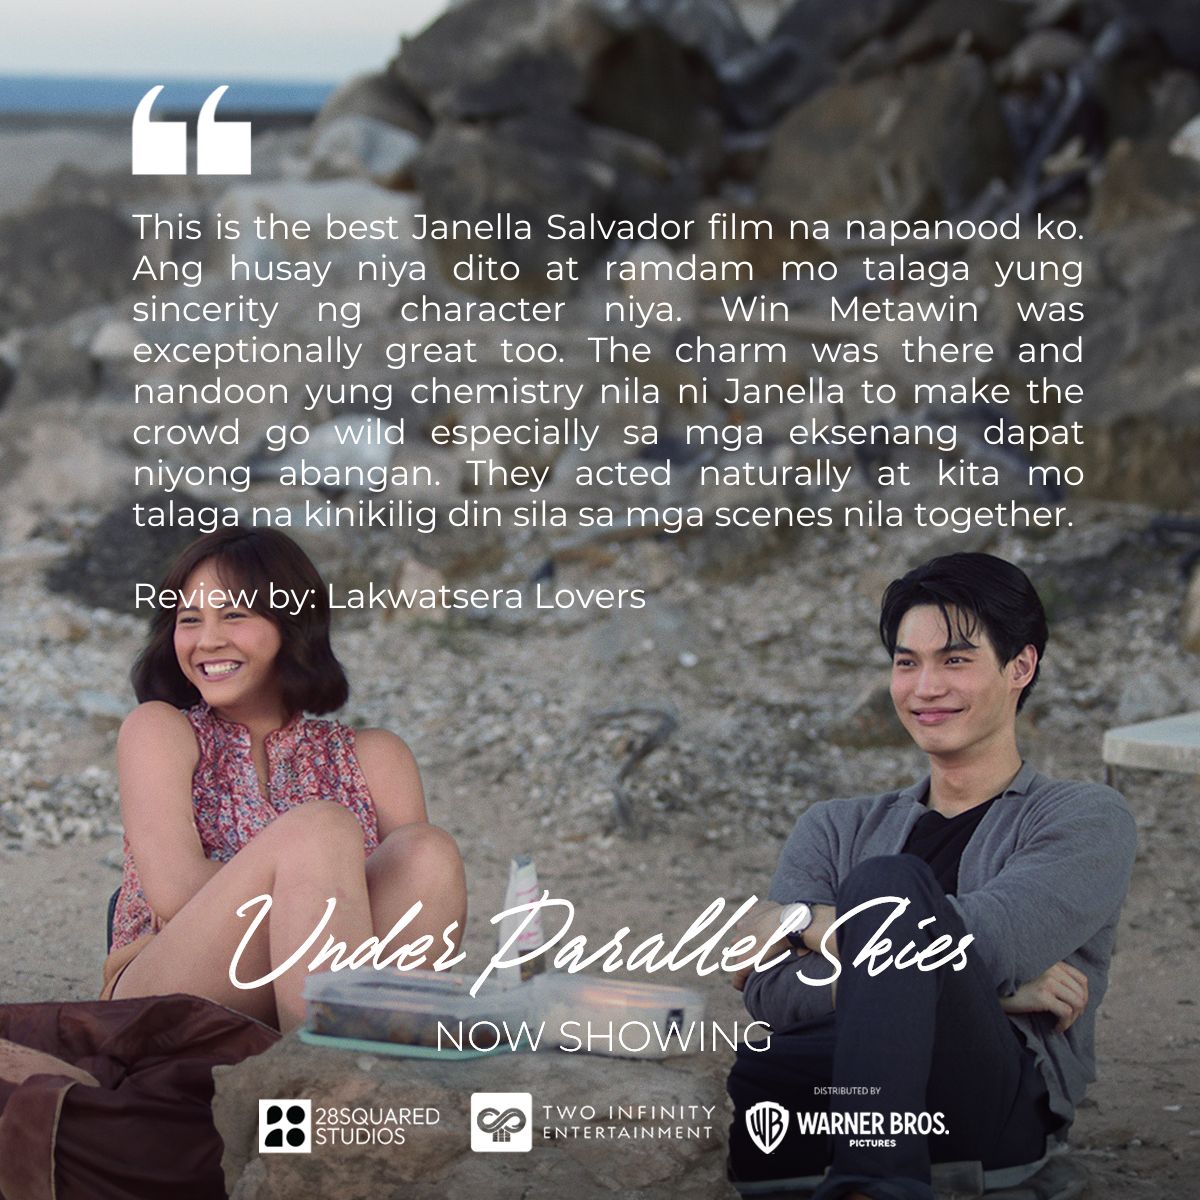 MOVIE REVIEW: They acted naturally at kita mo talaga na kinilig din sila sa mga scenes nila together. Starring Win Metawin and Janella Salvador & directed by Sigrid Bernardo, #UnderParallelSkies is now showing in more than 150 cinemas nationwide! #UPSNowShowing #WinElla